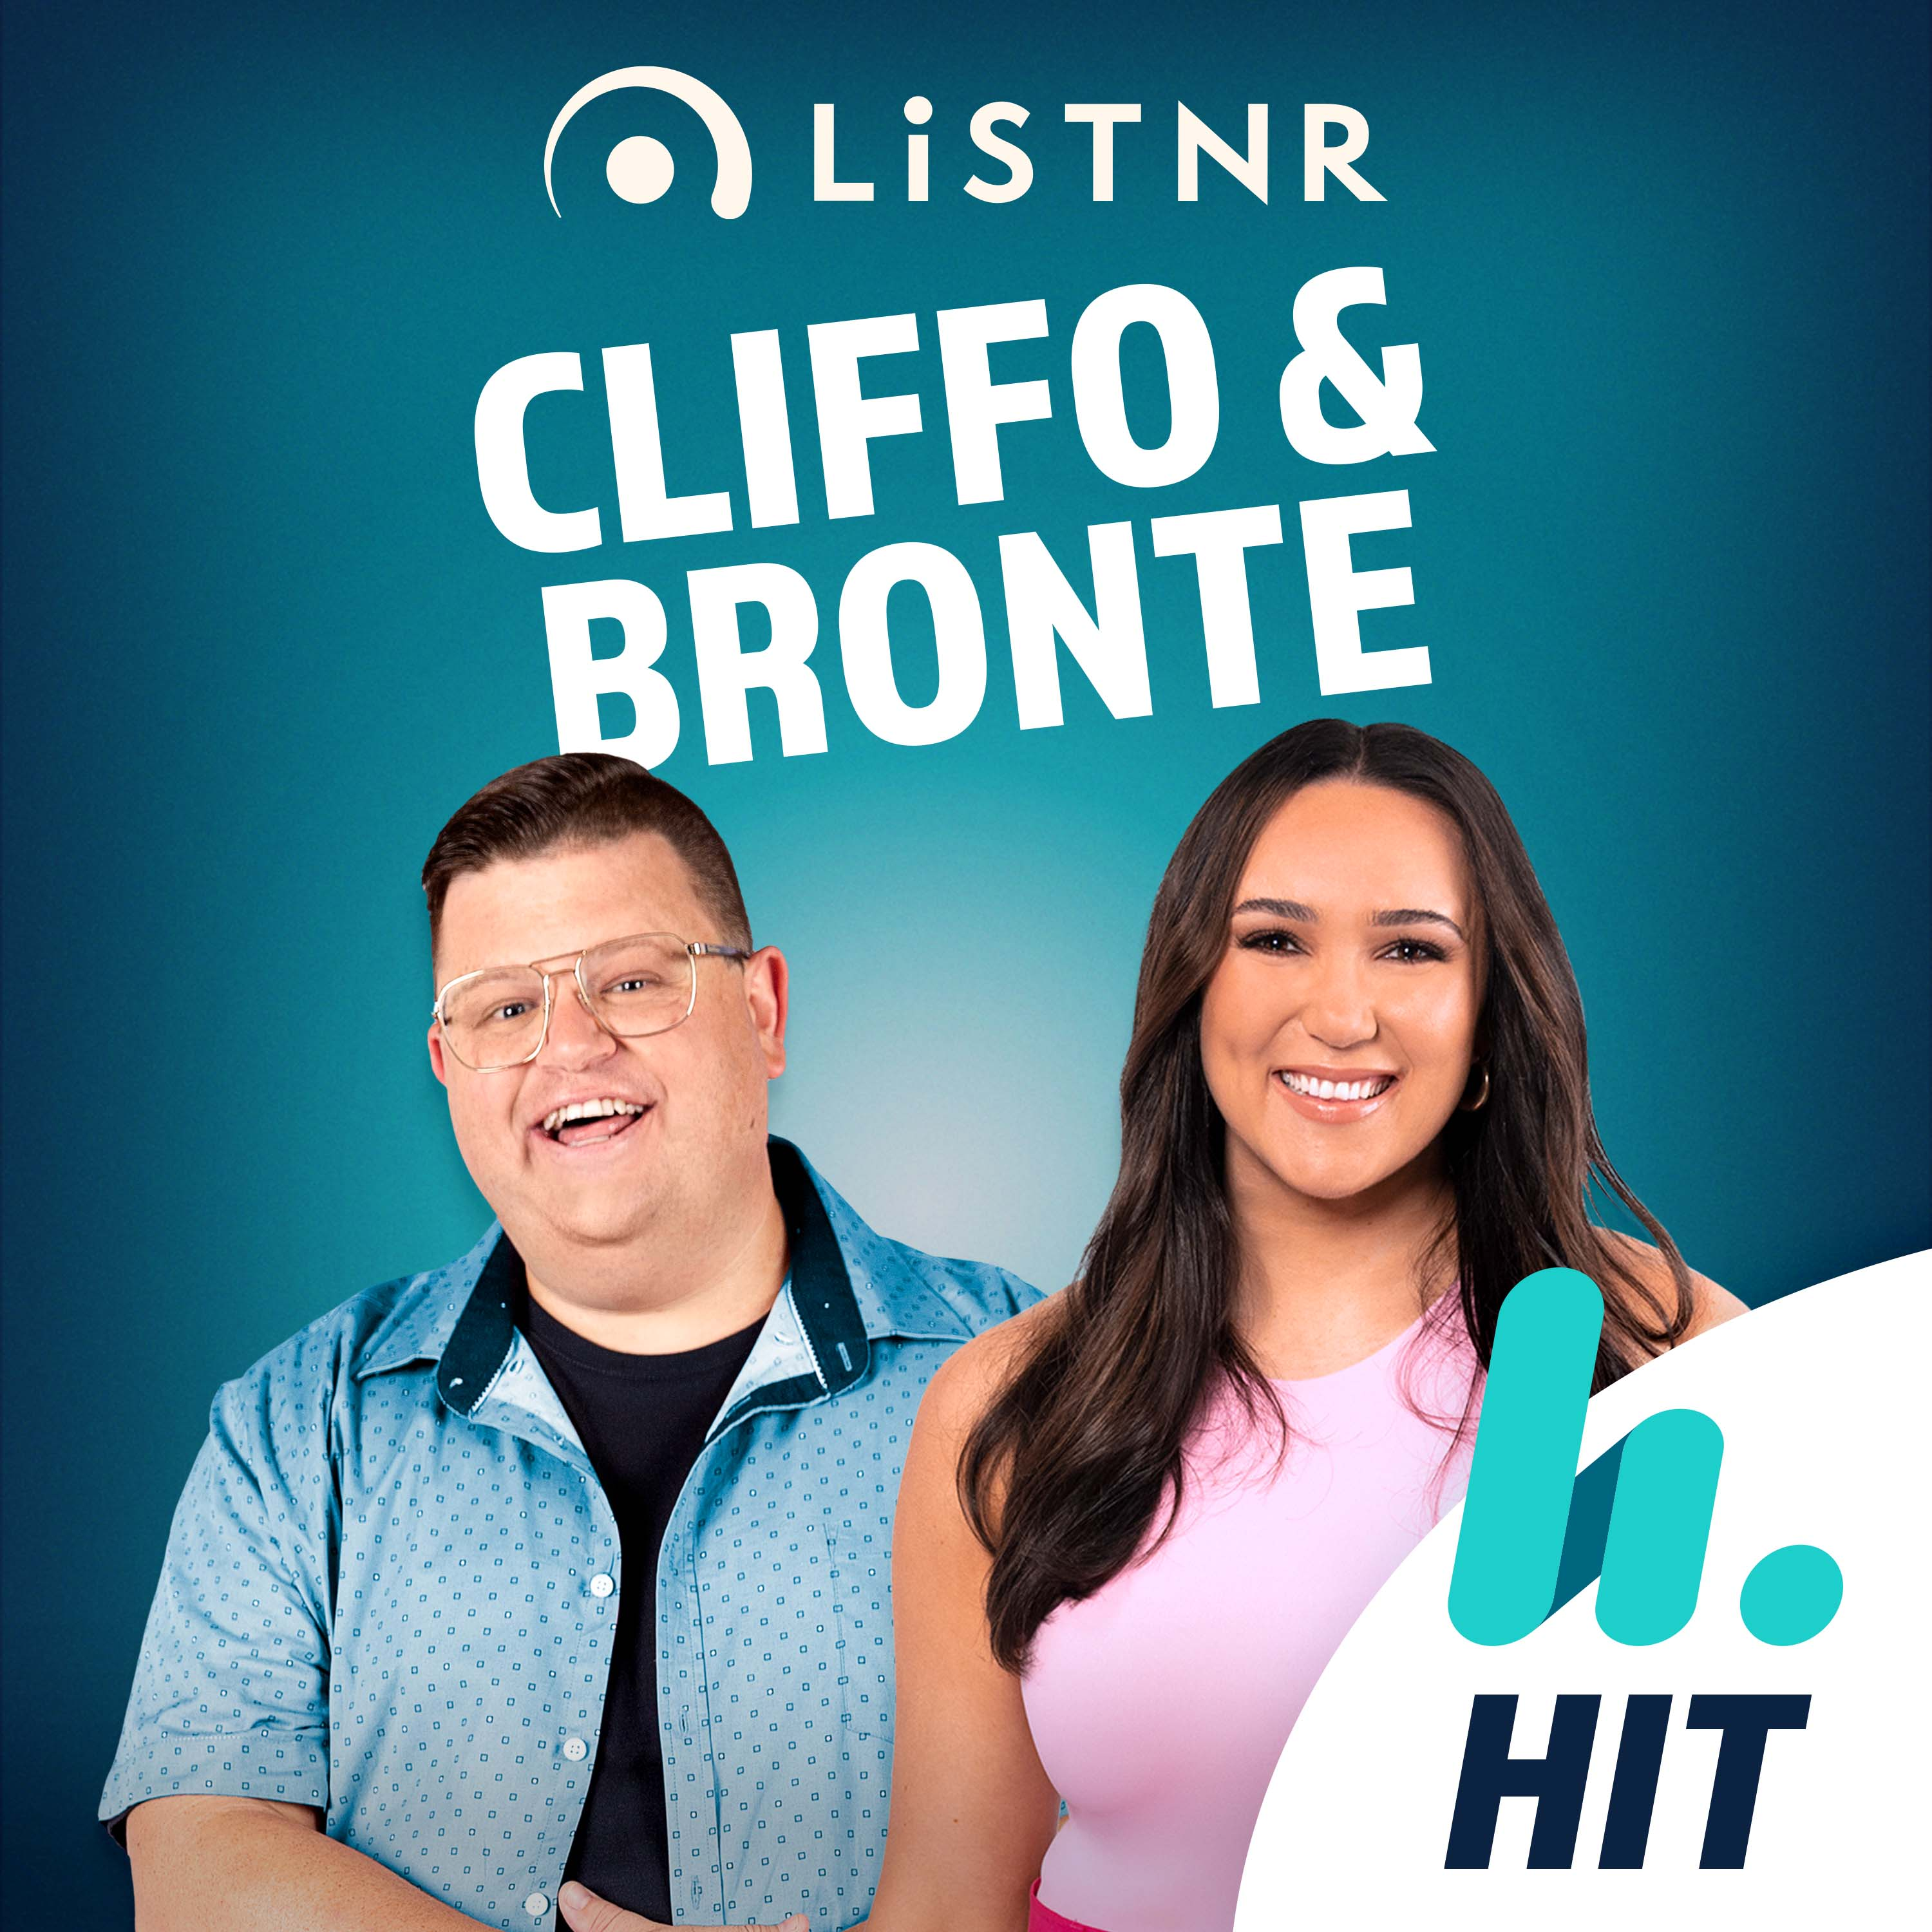 TUESDAY HIGHLIGHTS - Cliffo's getting the snip - Dylan has a question for Townsville - Floodgate Sunday 1 year on - Josh from MAFS chats LIVE!!!